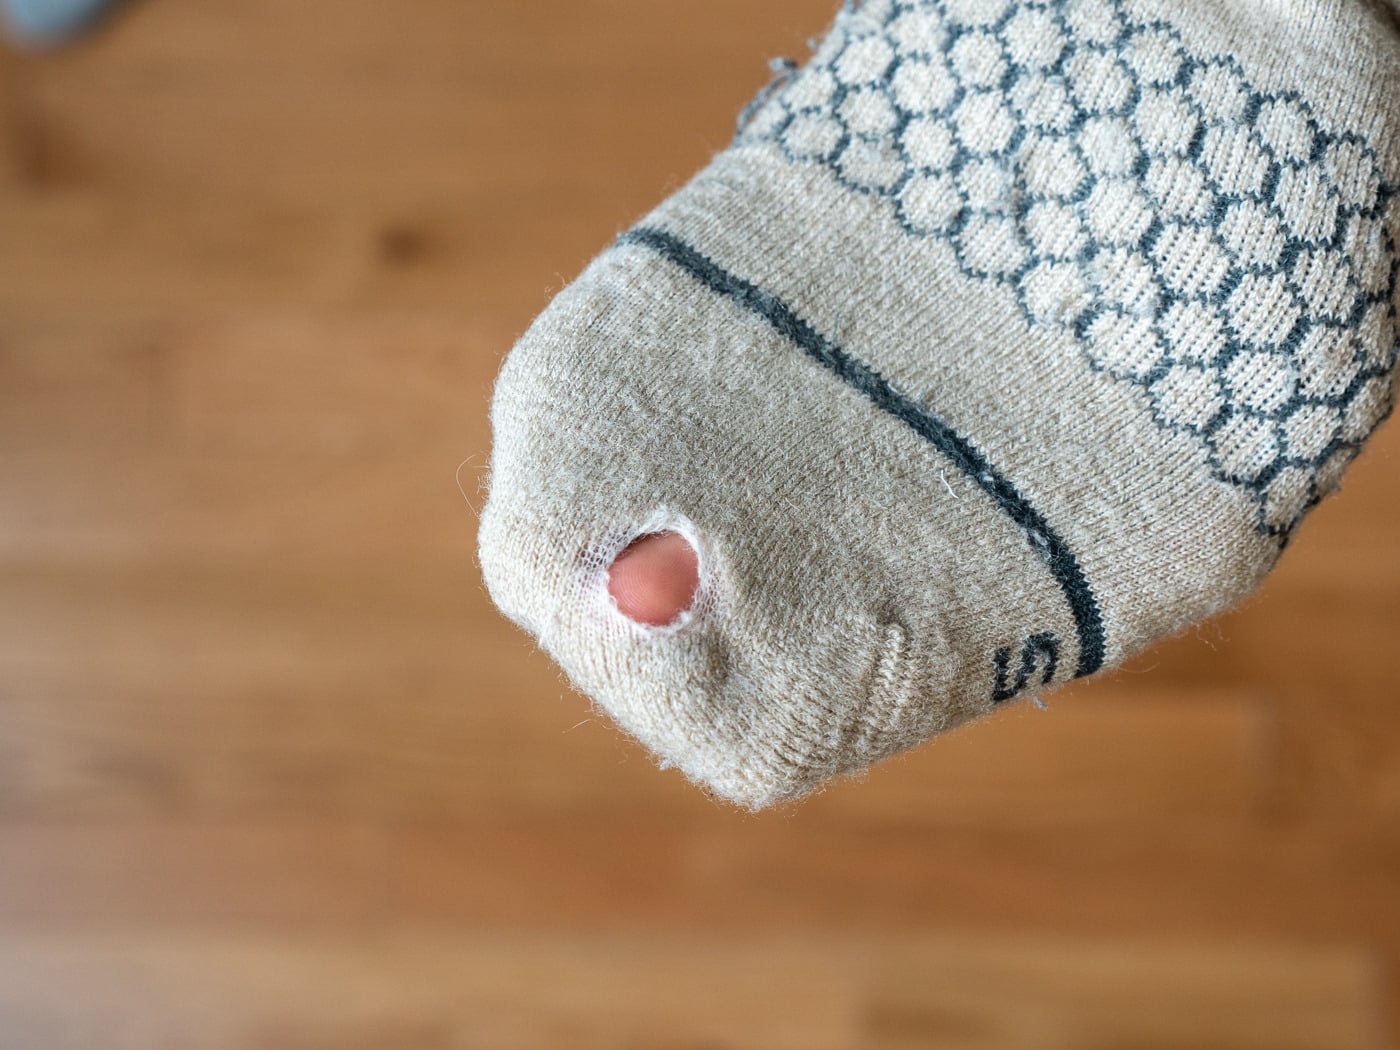 Bombas Socks - Style & Comfort for a Cause {Review} - The PennyWiseMama